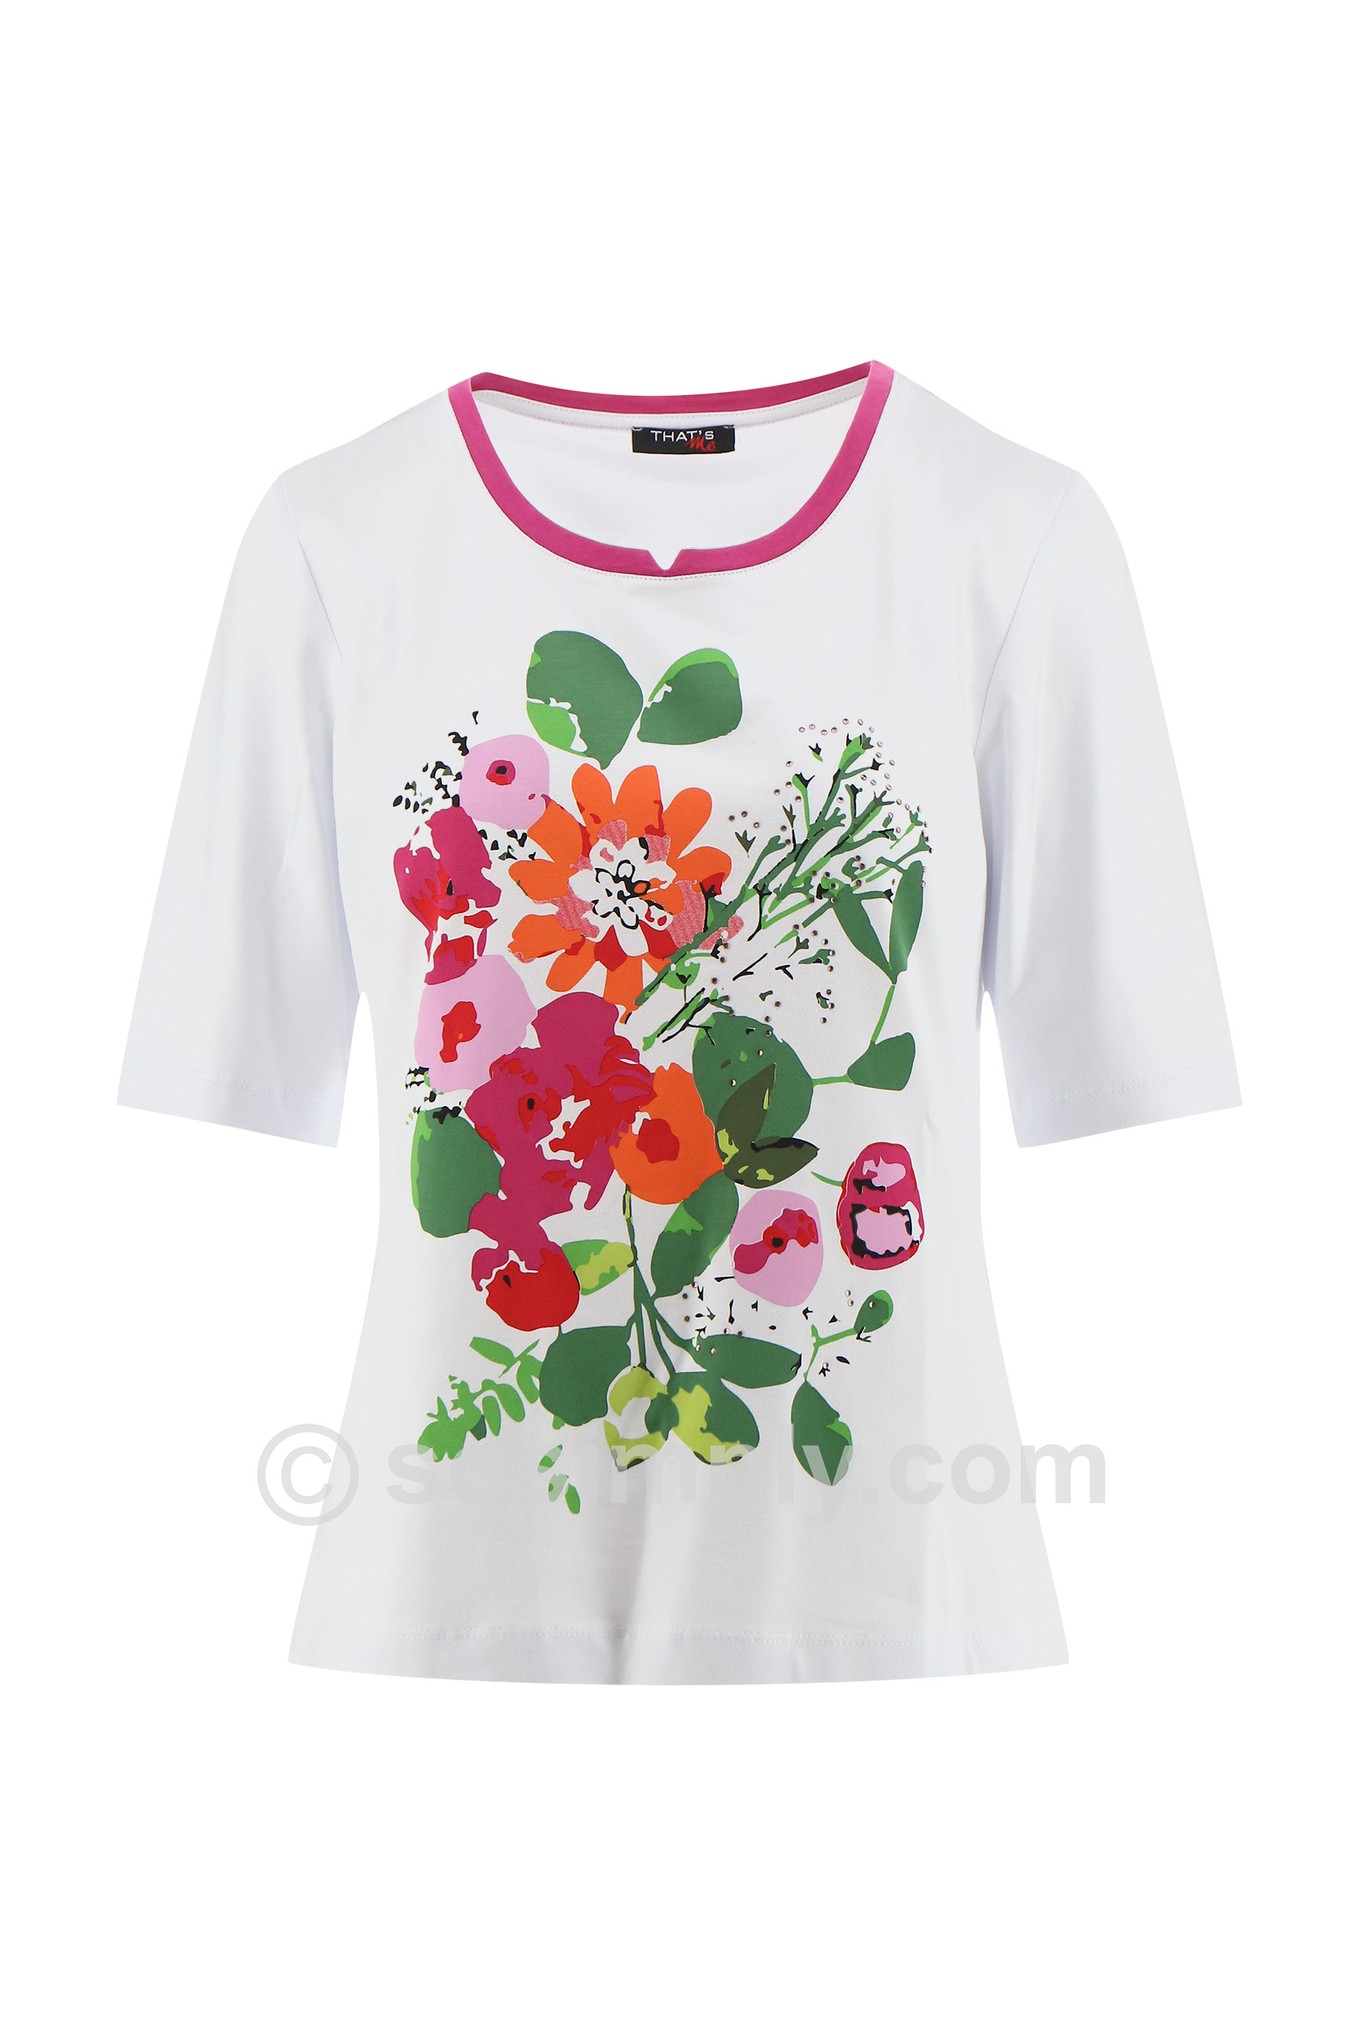 Thats Me Celina Floral Printed T Shirt